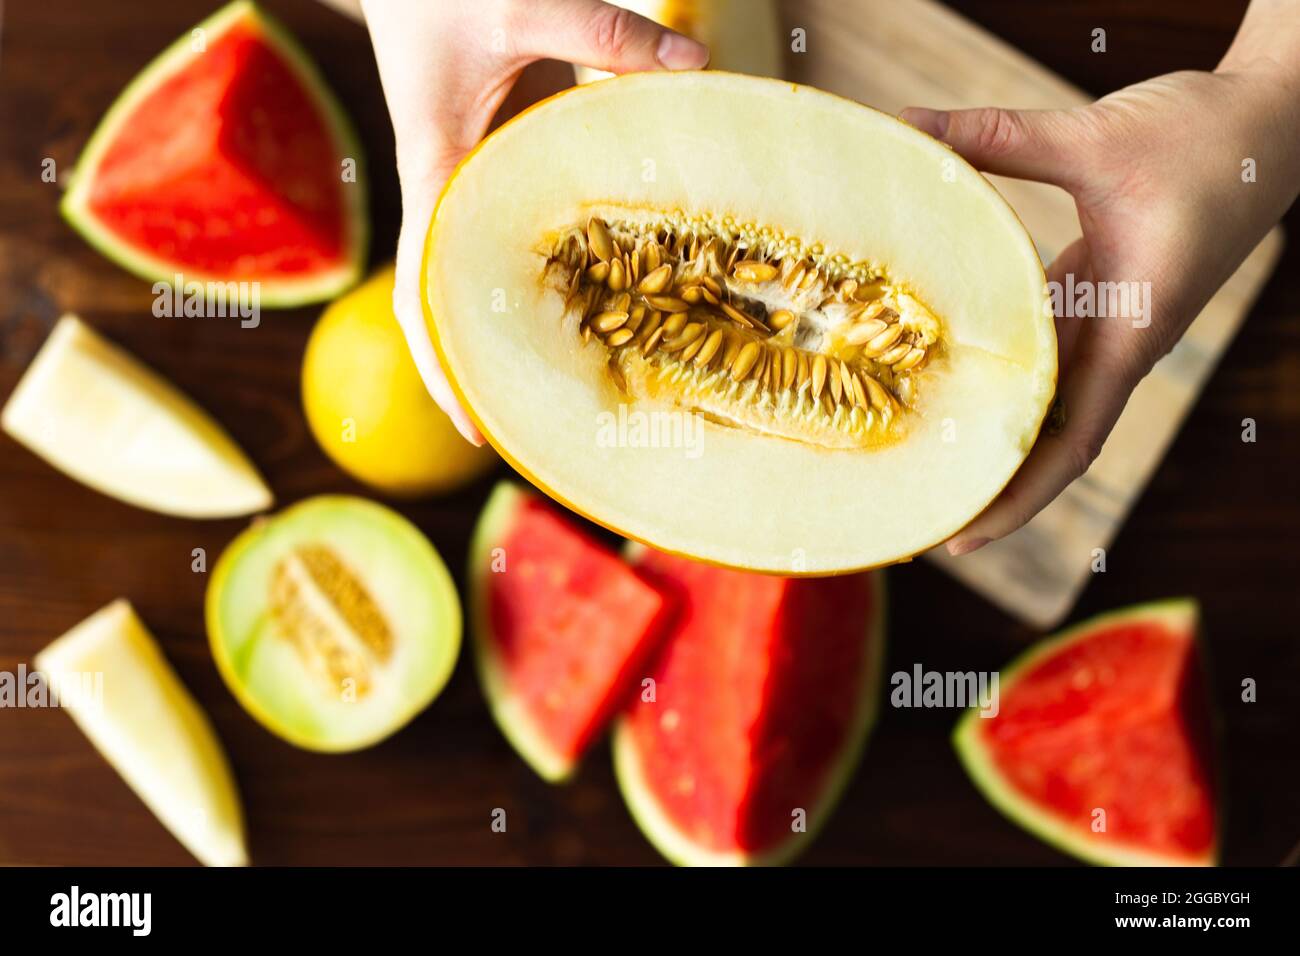 Top view of hands holding cut honeydew melon with seeds; variety of melon Stock Photo